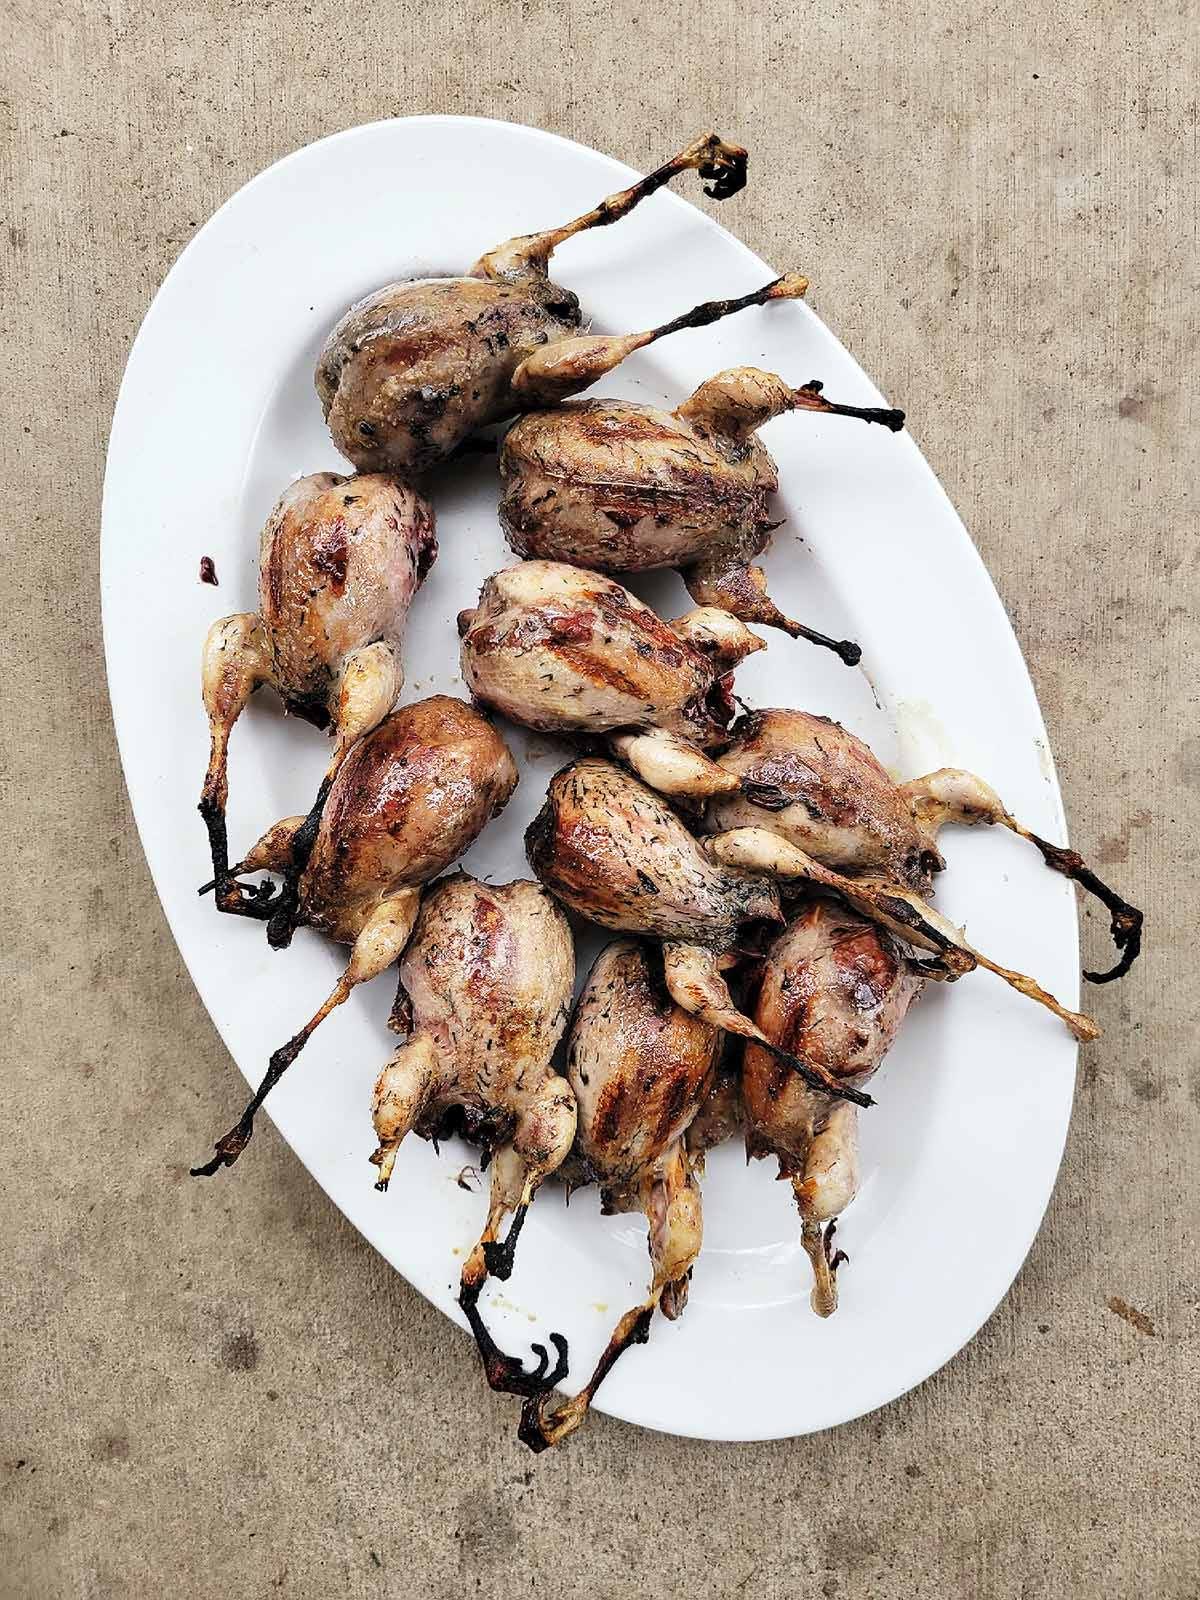 A platter of grilled woodcock.